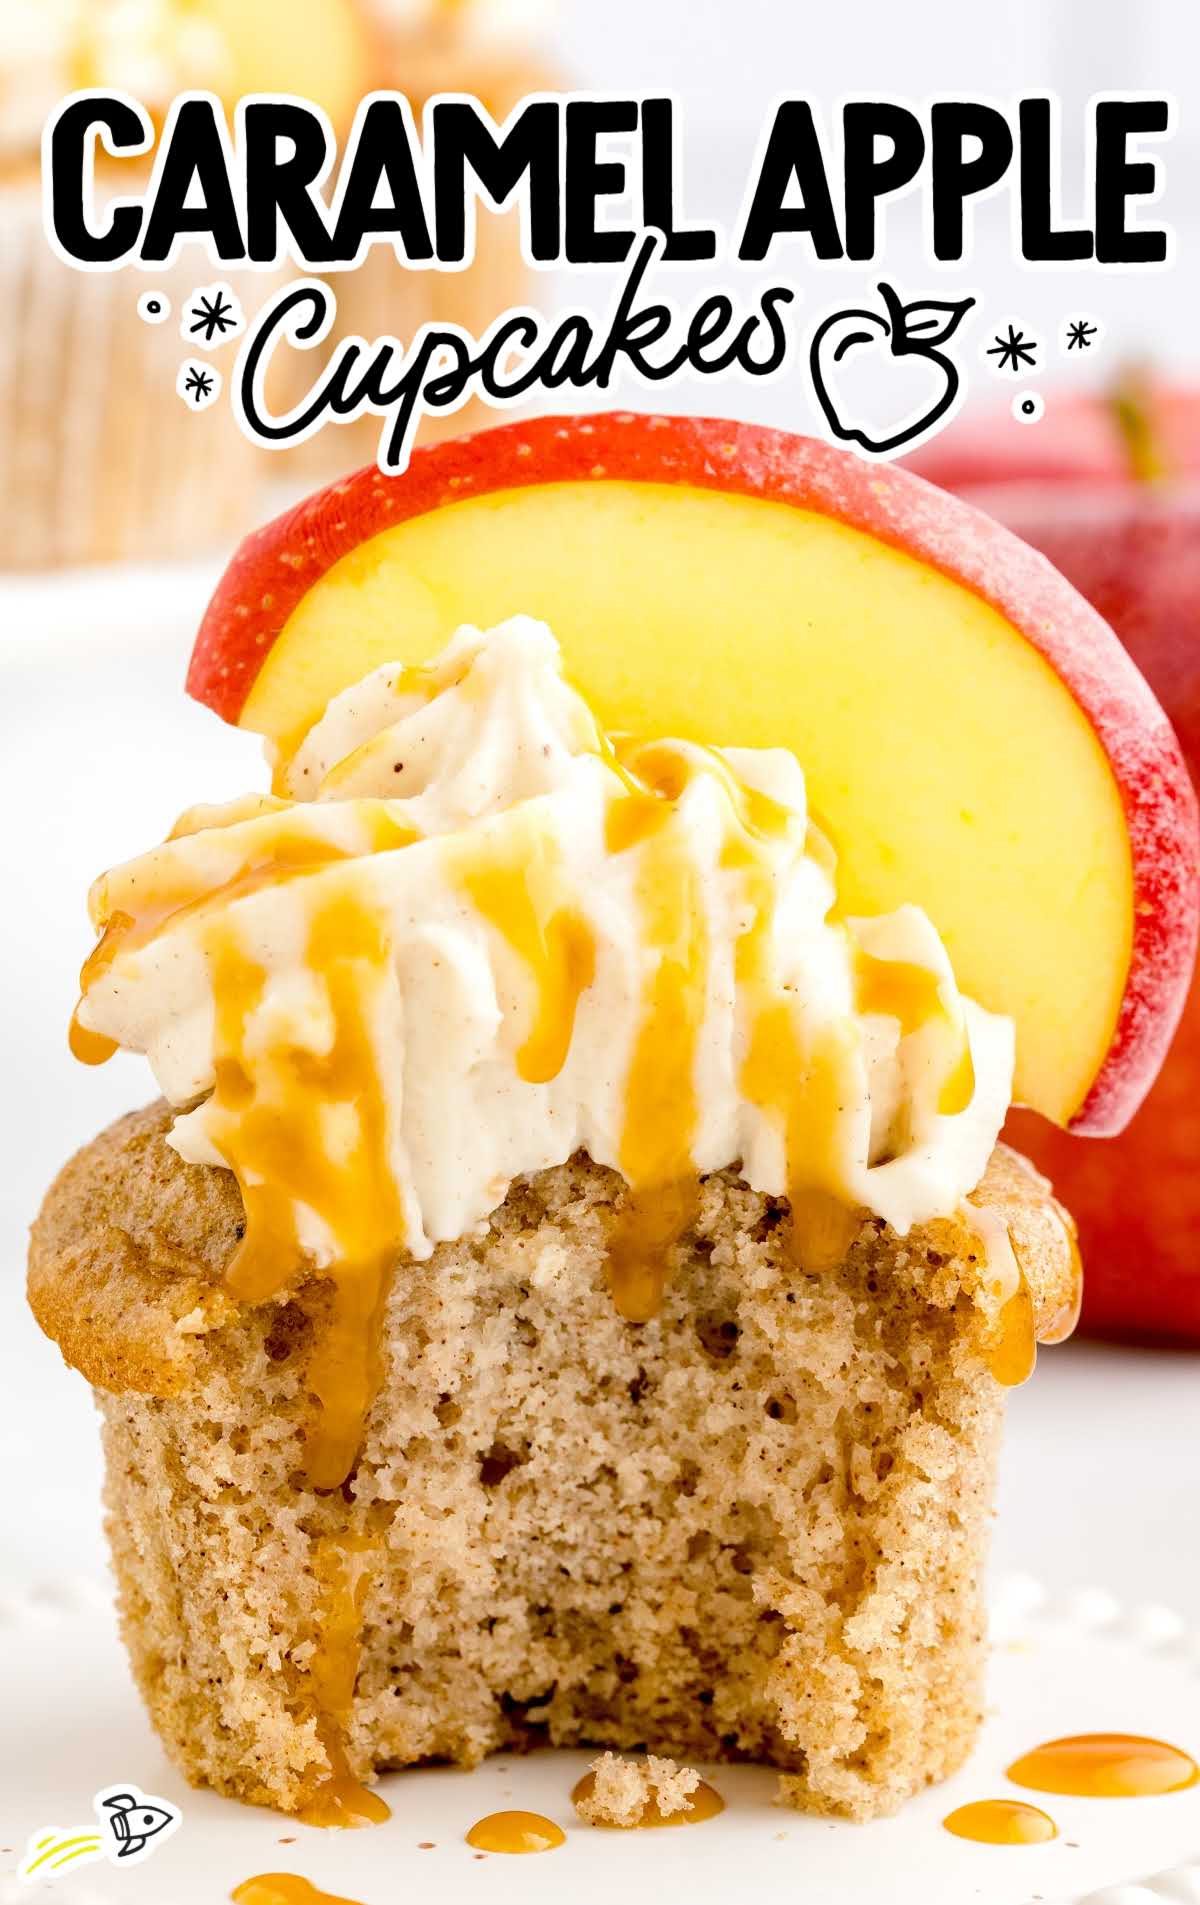 a close up shot of a Caramel Apple Cupcake on a stand with a bite taken out of it